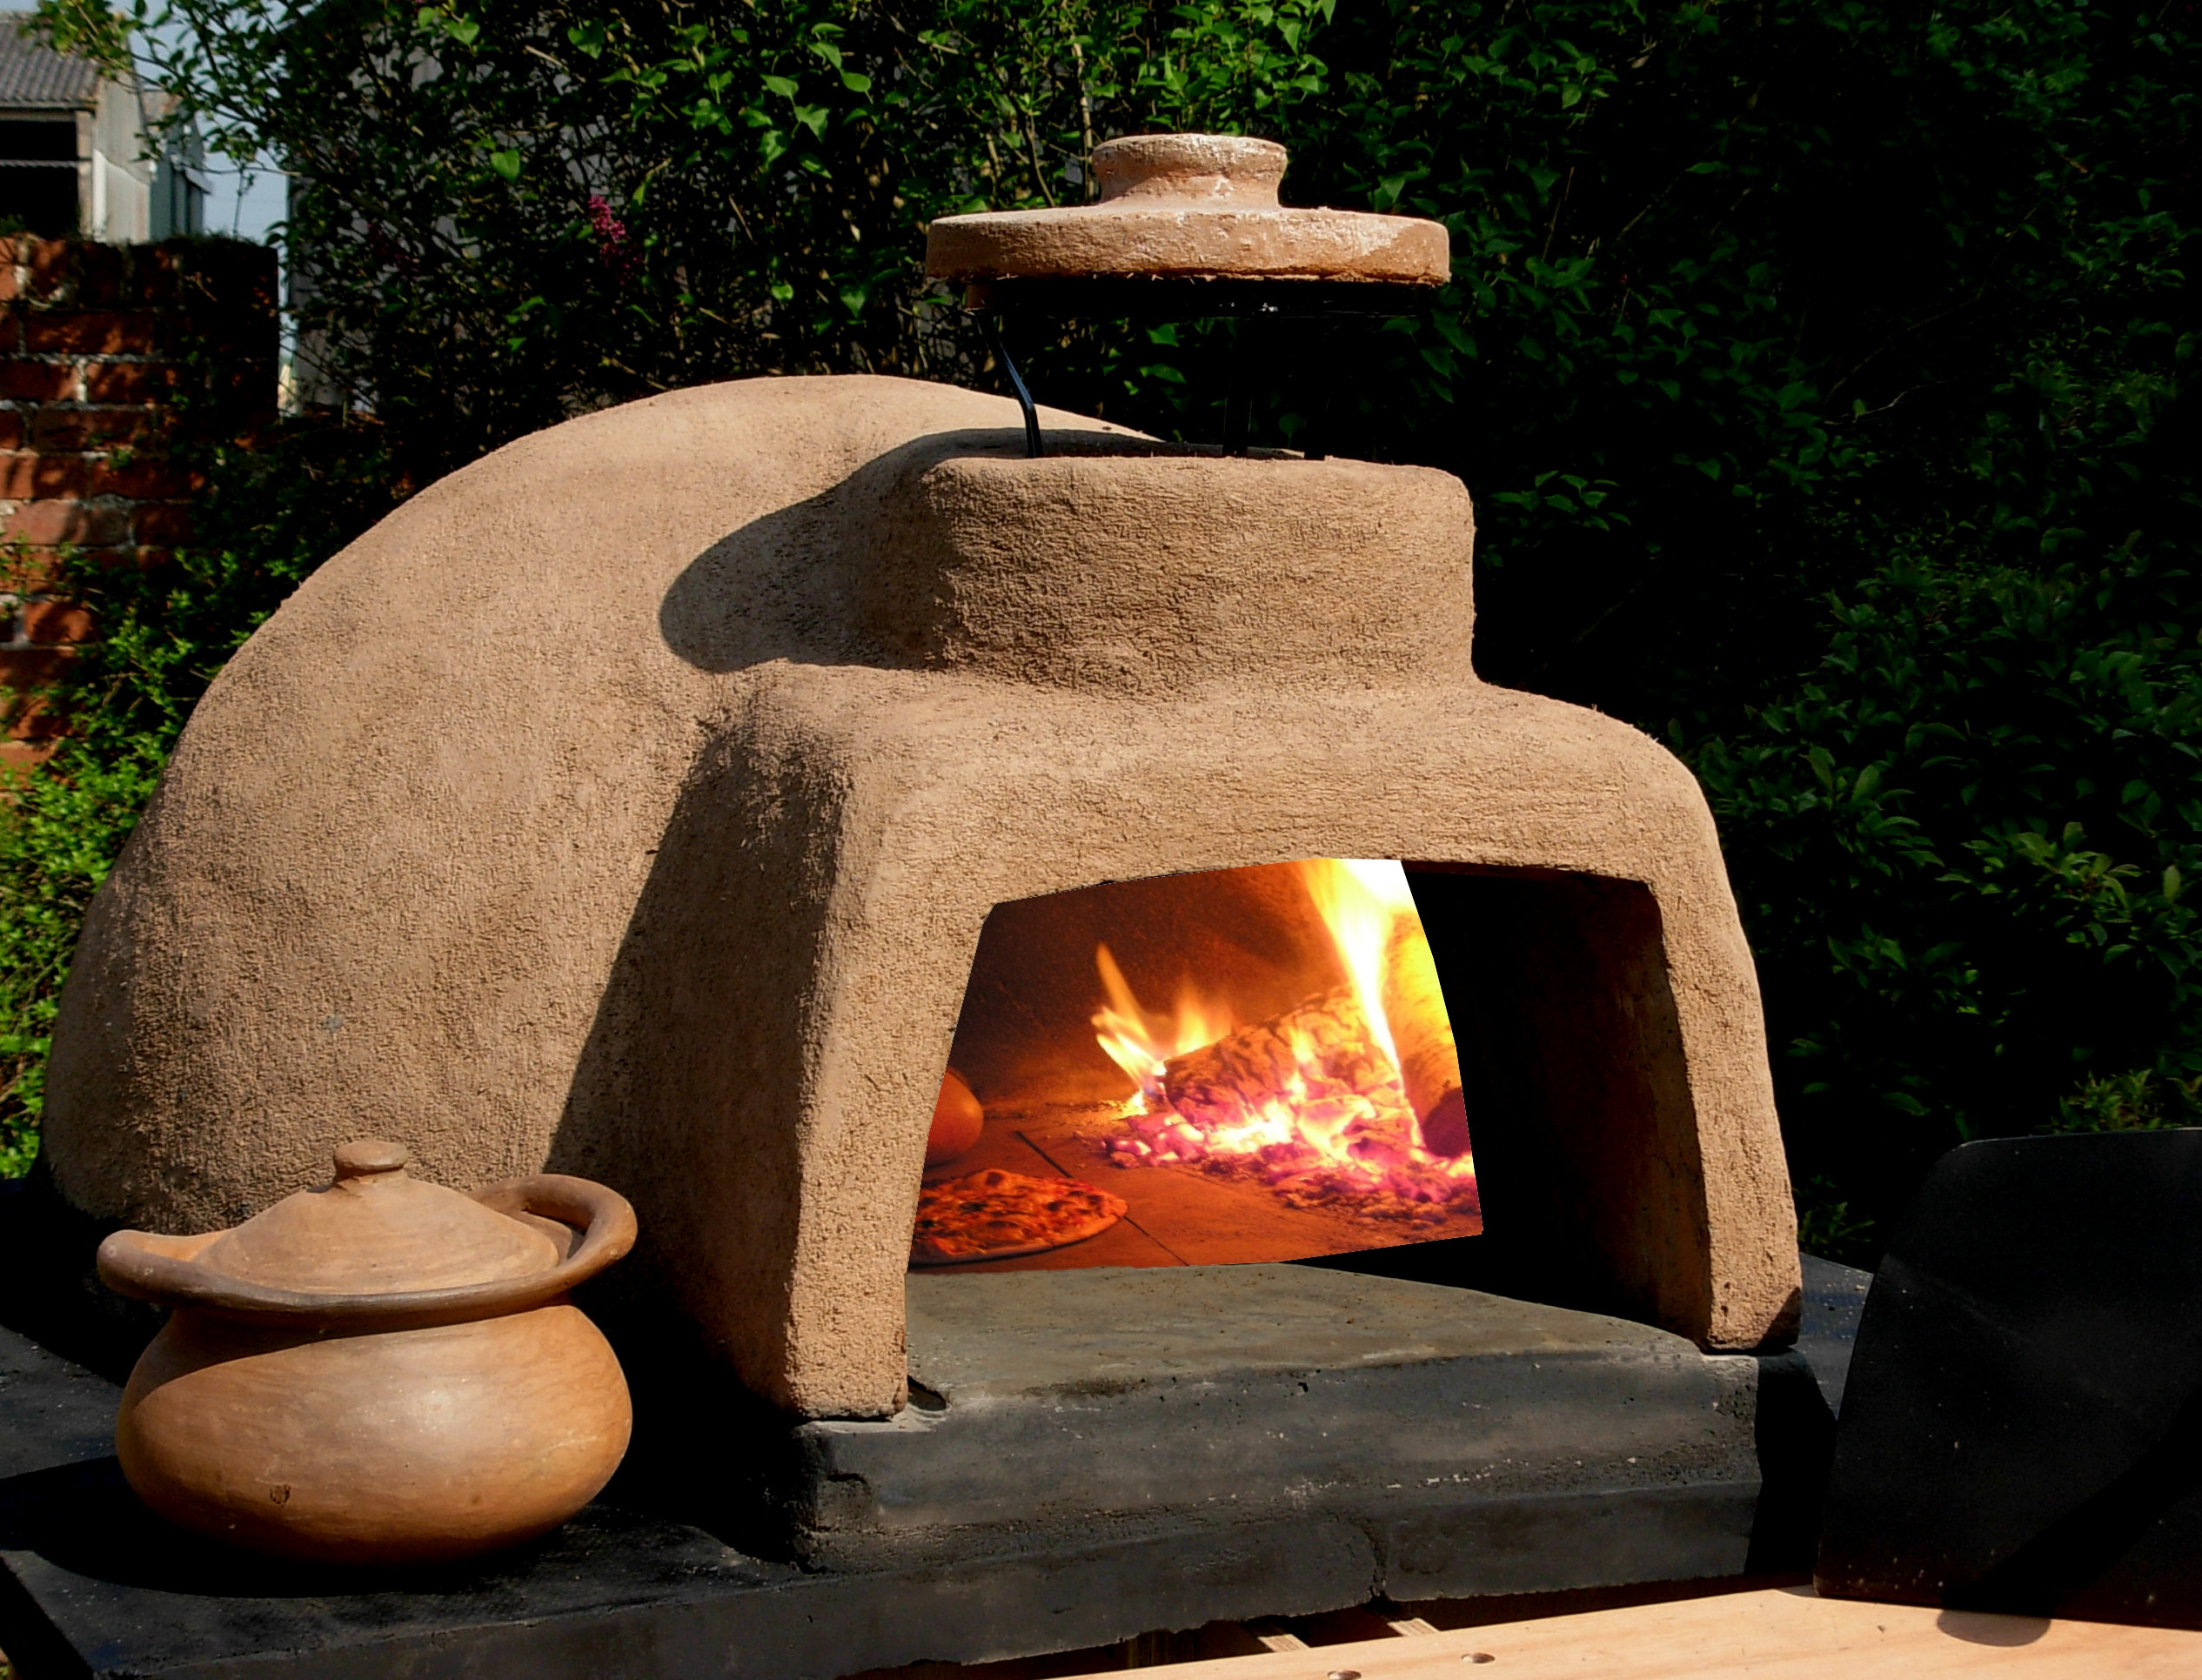 DIY Pizza Oven Outdoor
 15 DIY Pizza Oven Plans For Outdoors Backing – The Self